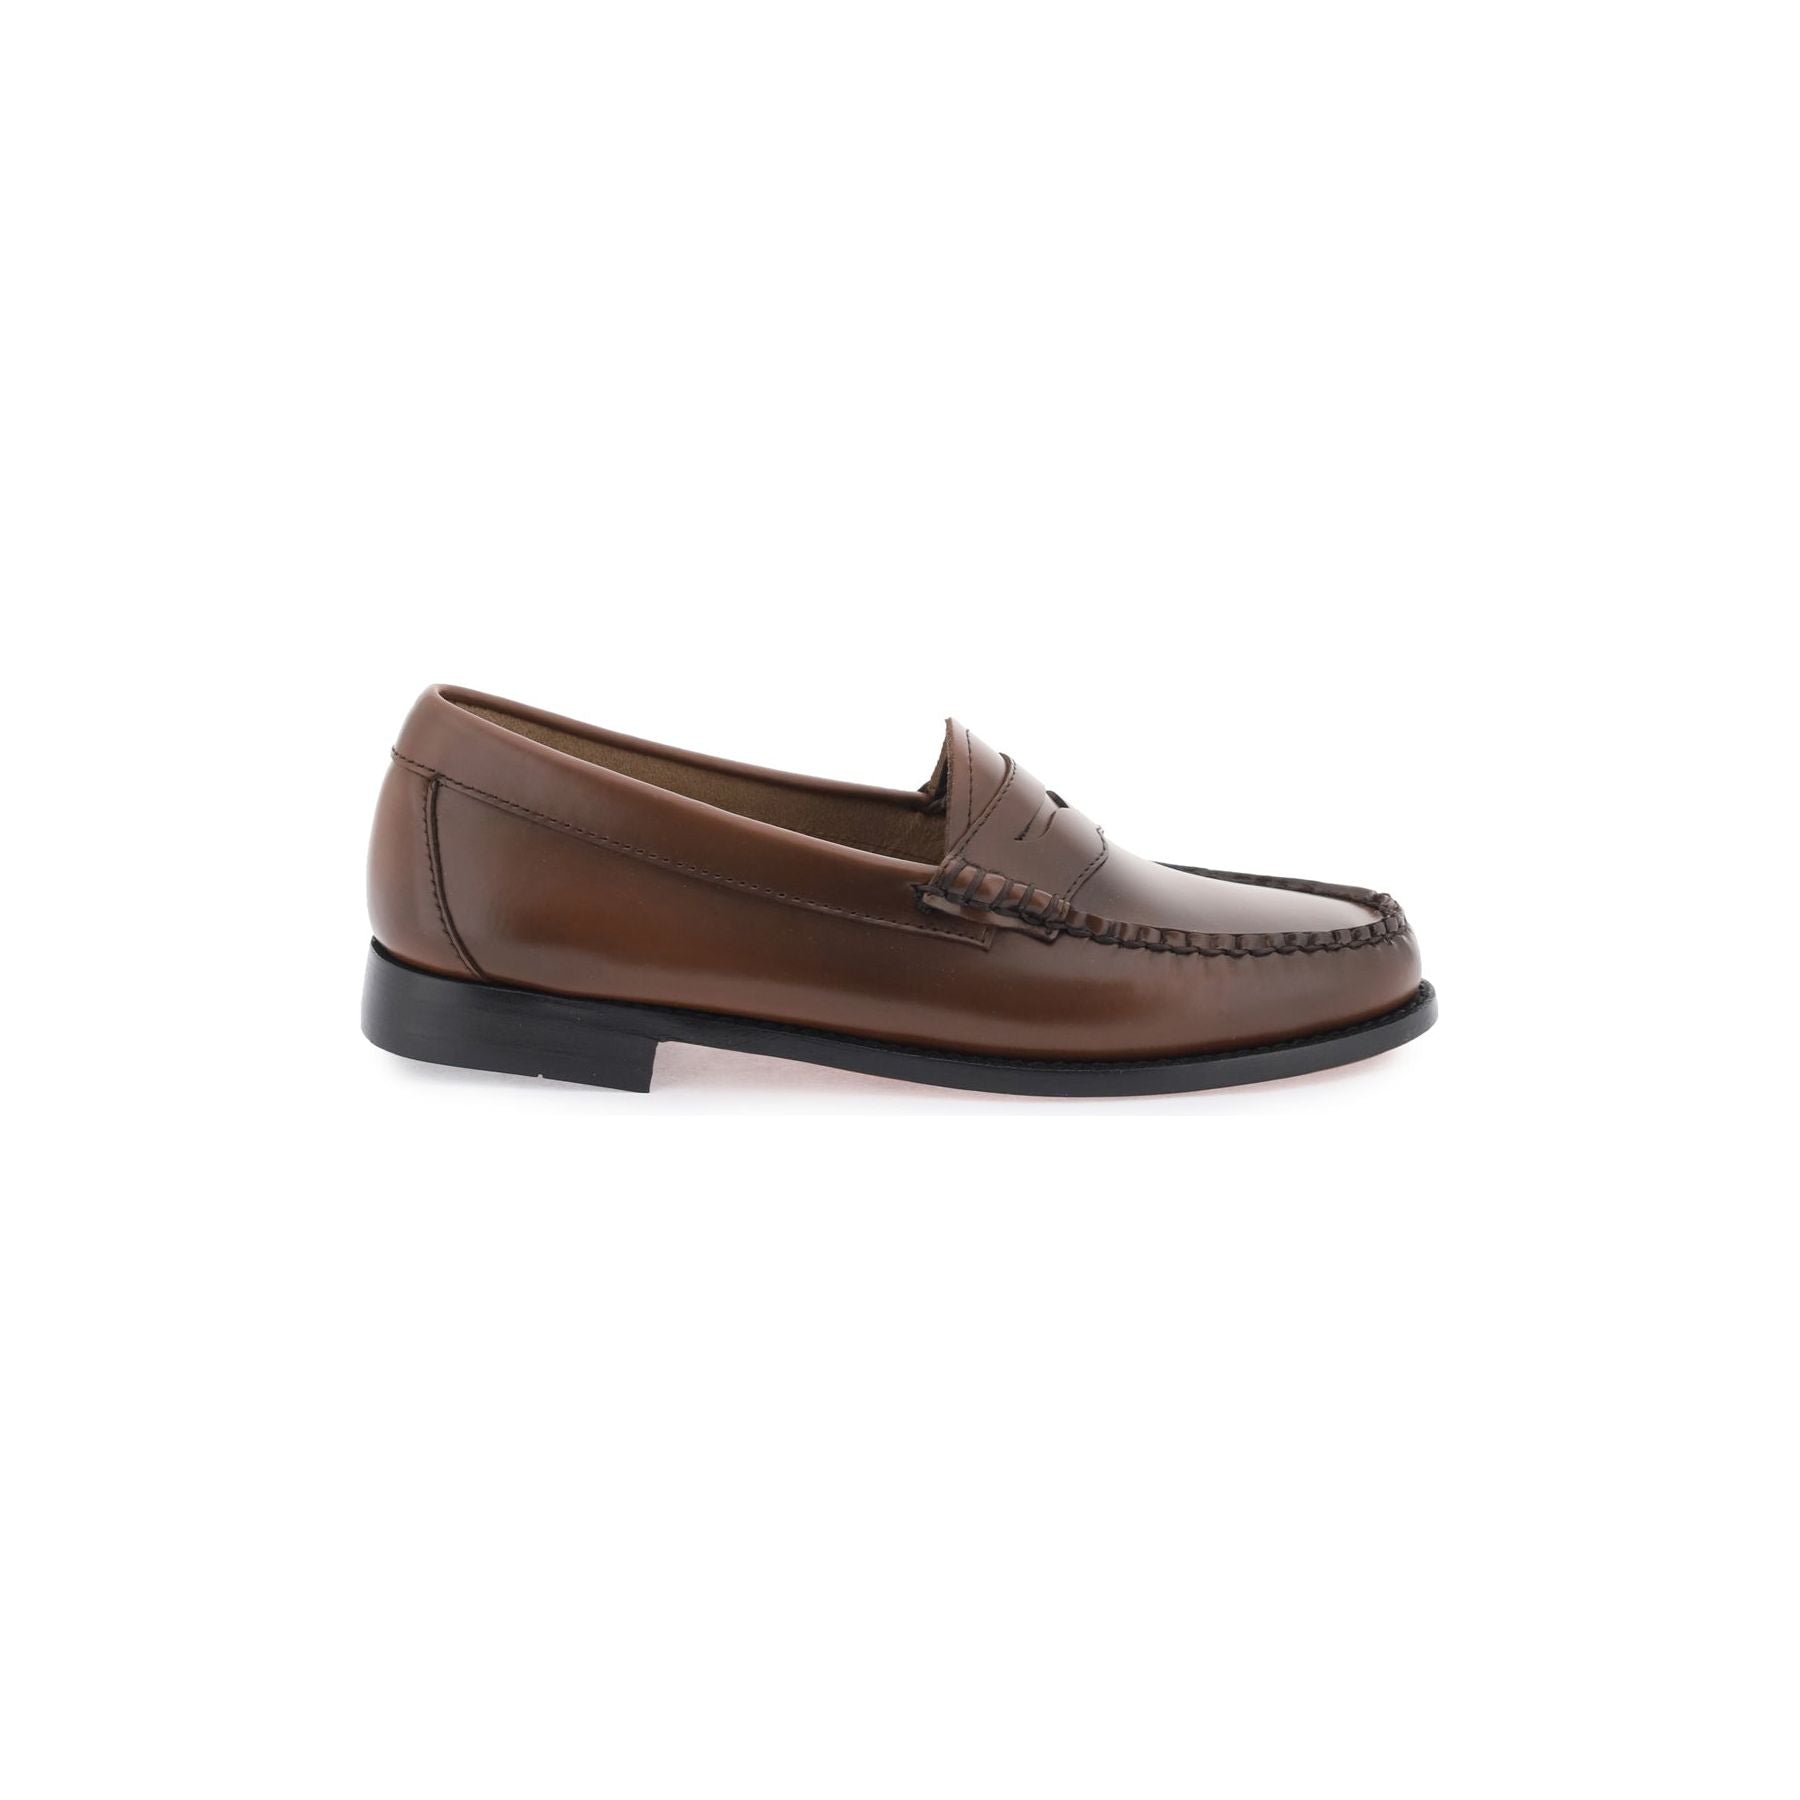 'Weejuns' Penny Loafers